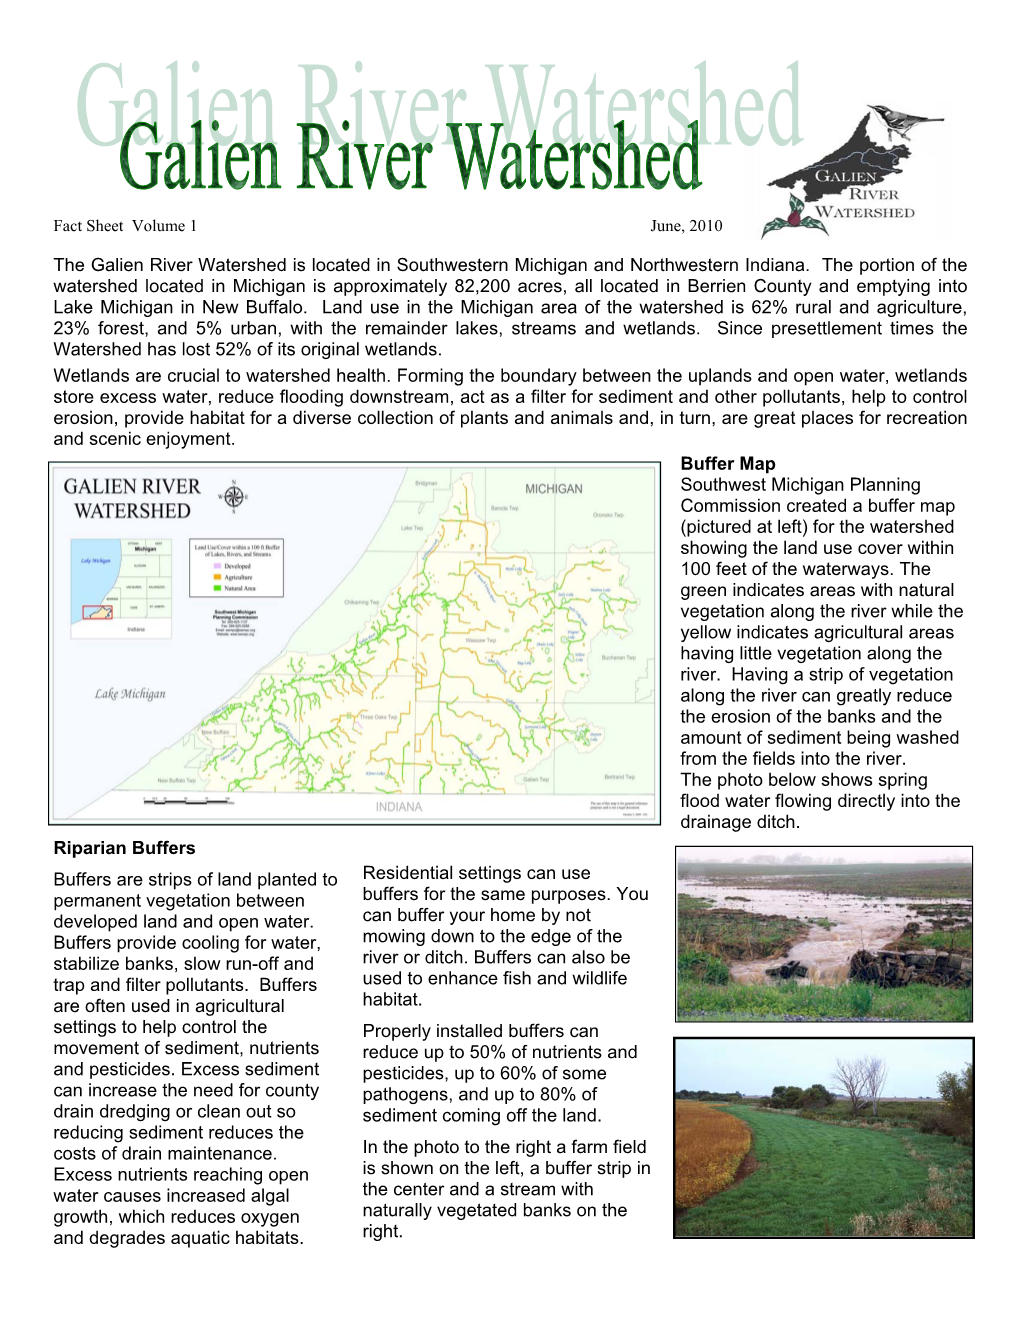 The Galien River Watershed Is Located in Southwestern Michigan and Northwestern Indiana